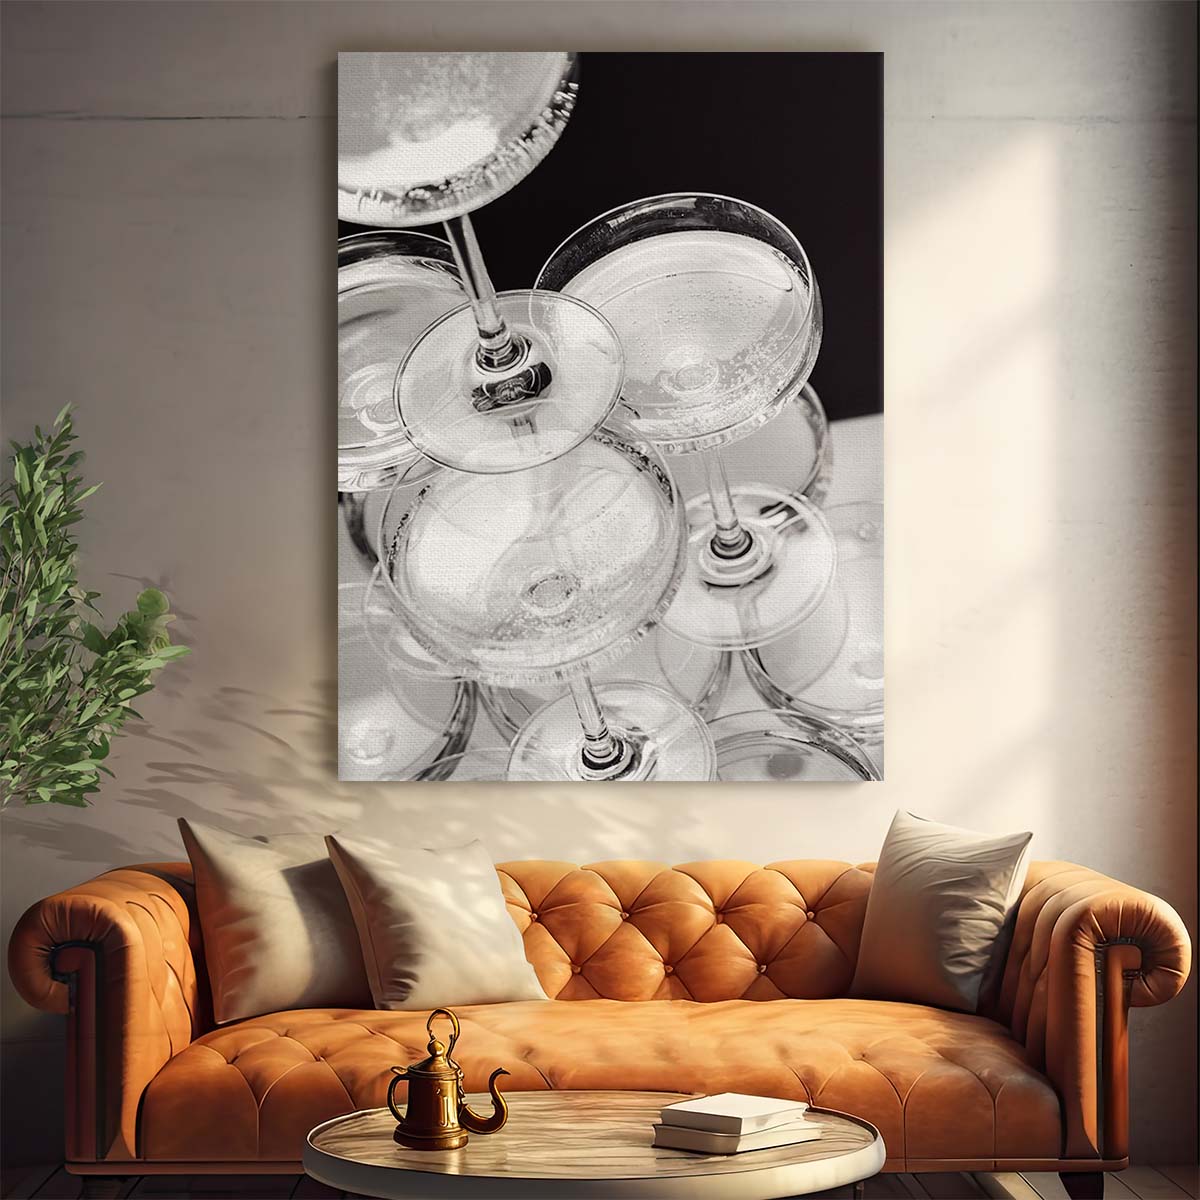 Vintage Black and White Champagne Tower Photography Artwork by Luxuriance Designs, made in USA